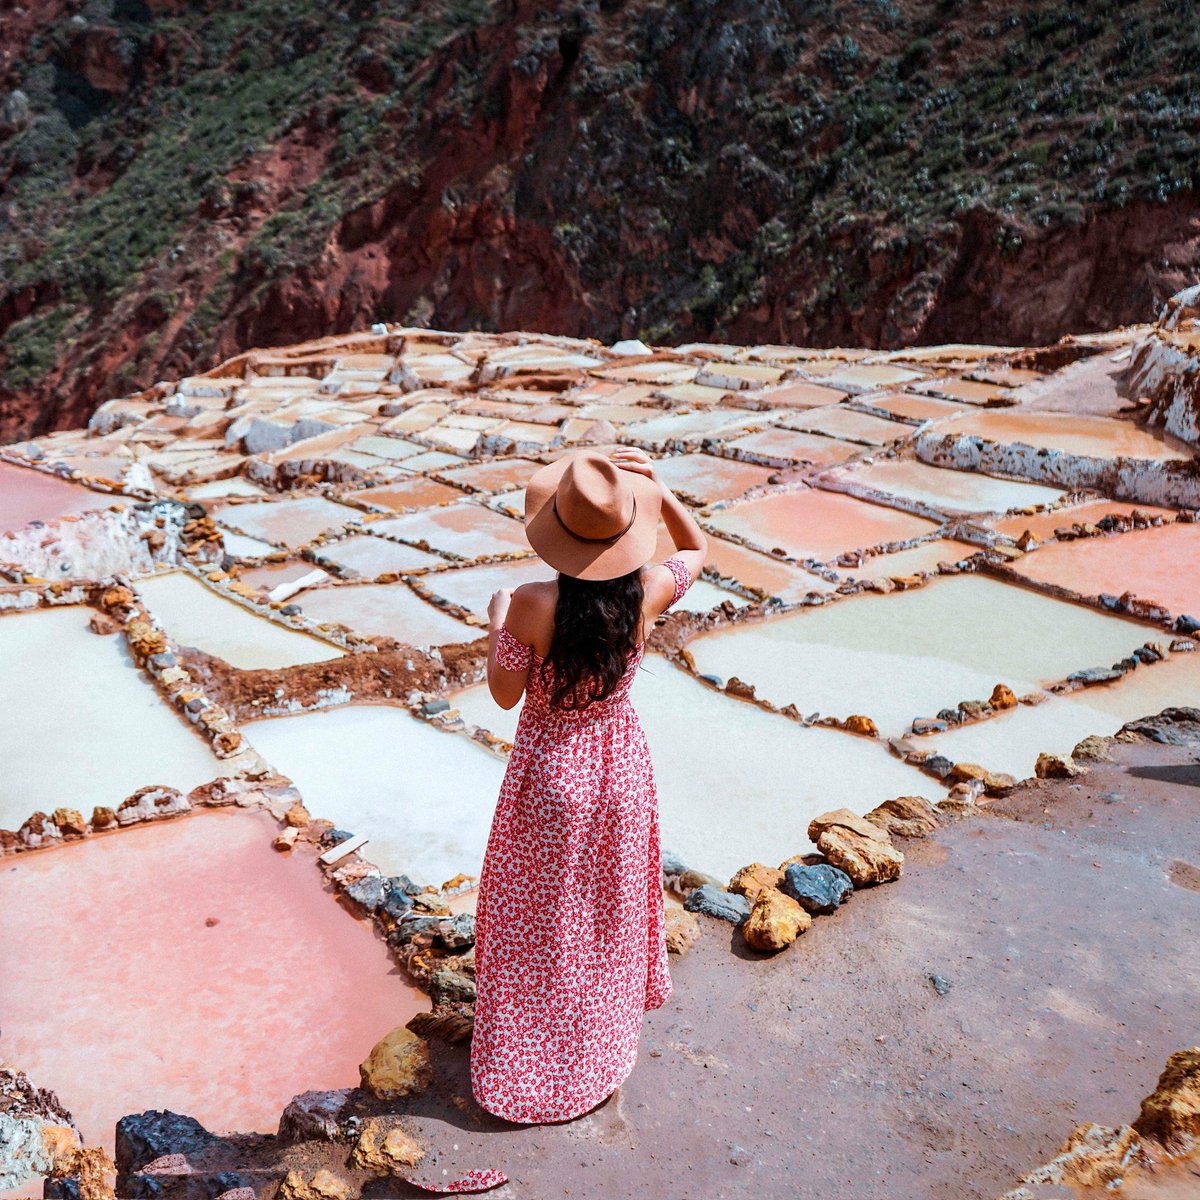 The ancient Maras #SaltMines are one of Peru's hidden gems nestled in the mountains of the #SacredValley of the Incas.
🌐More Info: n9.cl/w55um
#peru🇵🇪 #cuscojourneys #nakedplanet #bestplacestogo #exploretheglobe #perú #cusco #bestintravel #machupicchu #travelmoments